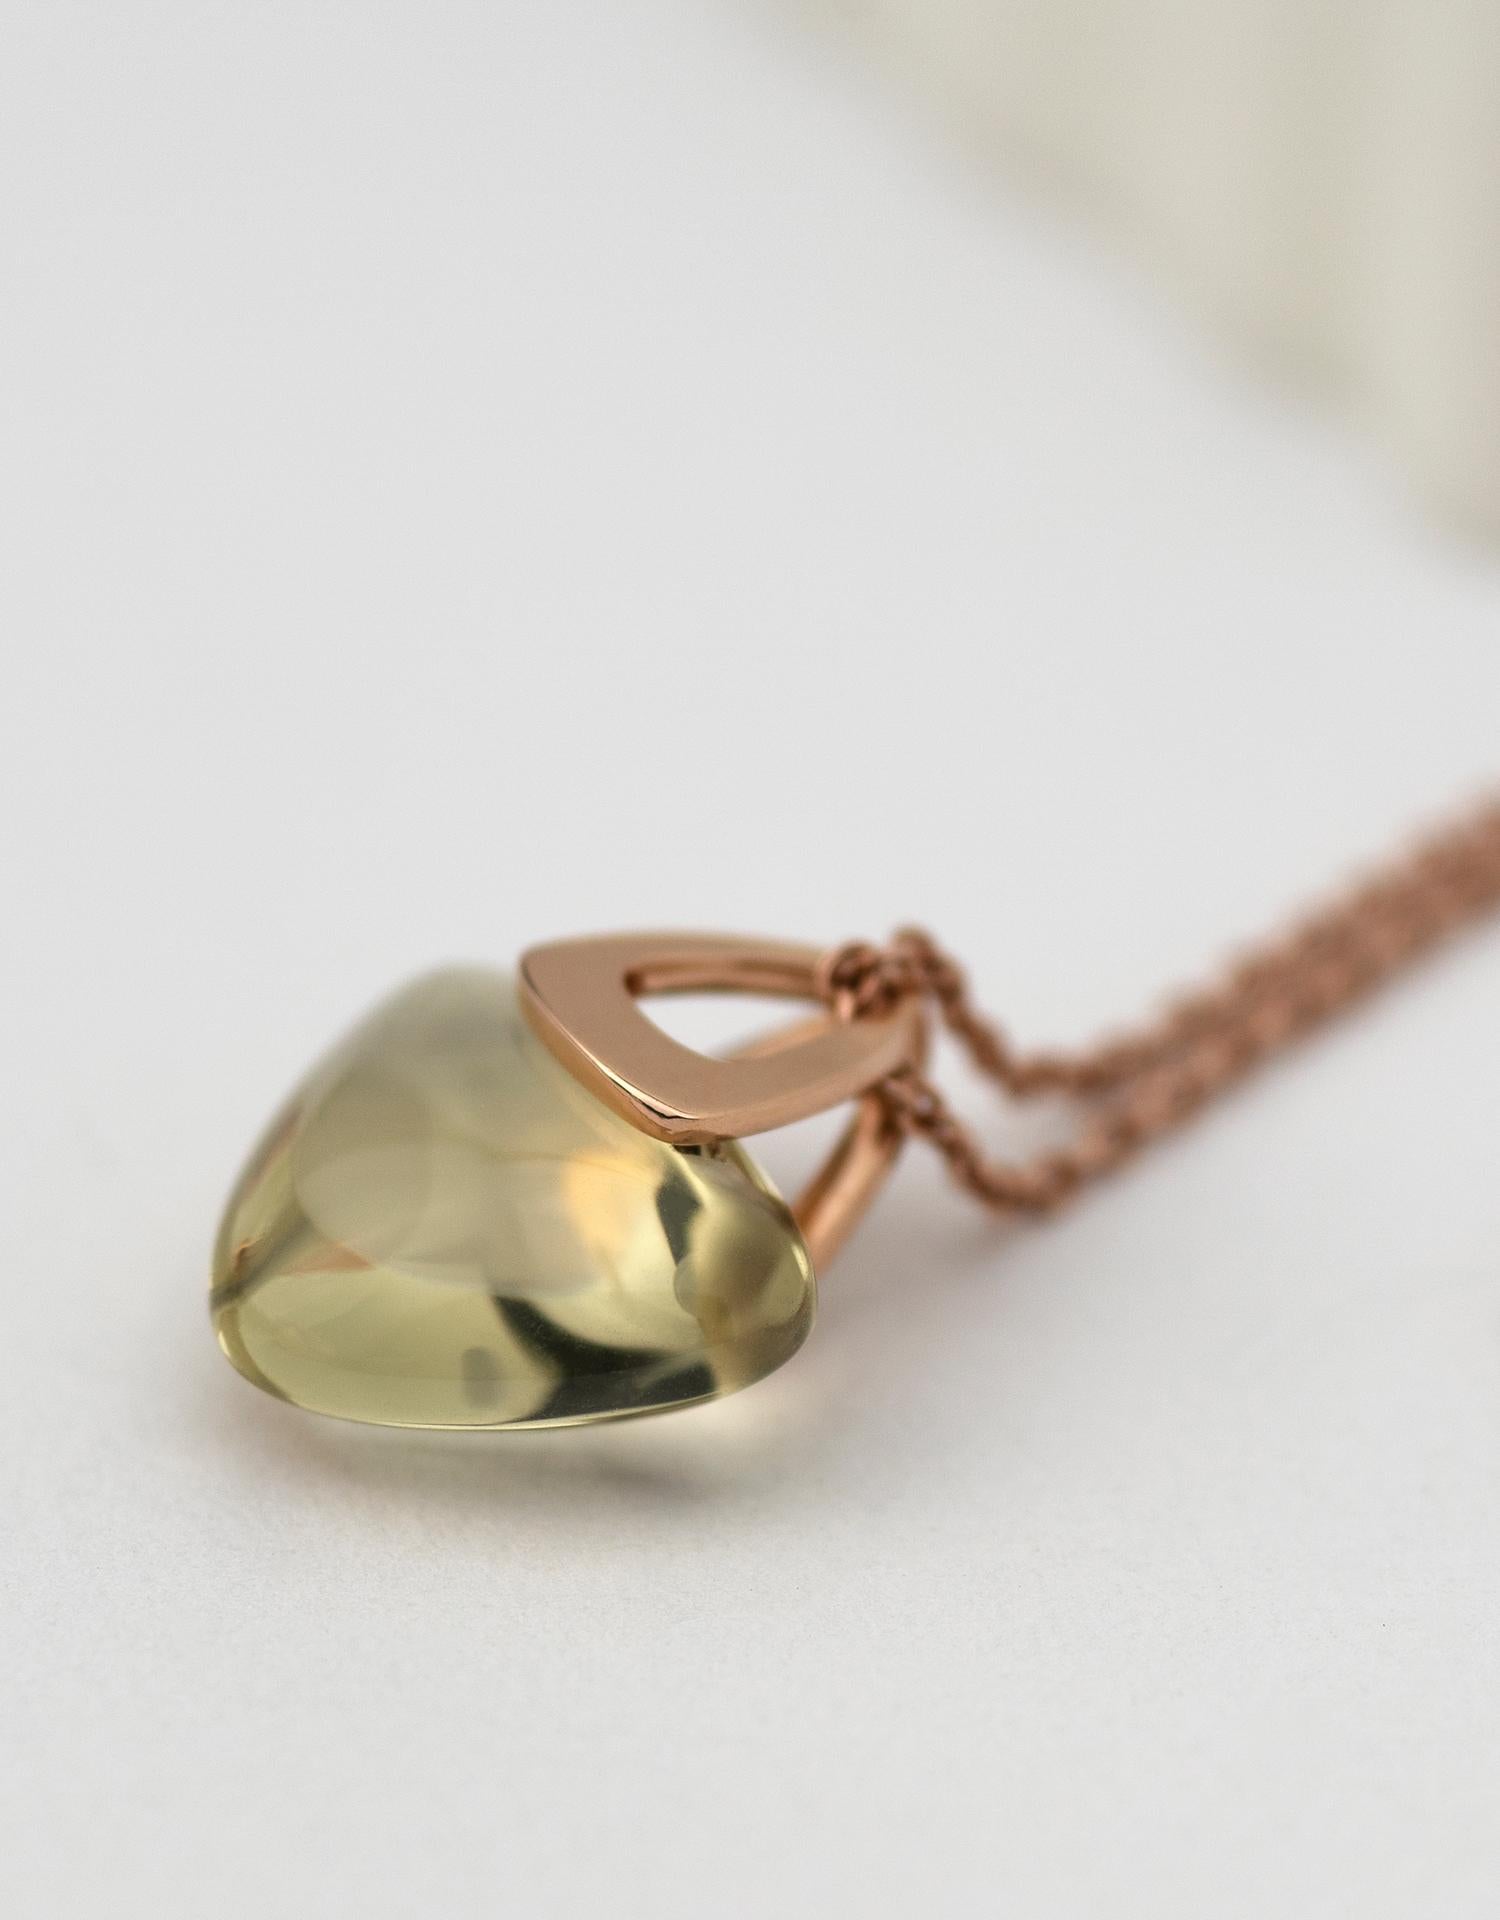 Rebecca Li designs mindfulness. 
This design is from her Luck Rock Collection.

Talisman Pendant :
18K Rose Gold
Lemon Citrine
Pendant Size: 9 mm W * 6 mm D * 18 mm H
Gemstone Size:  8 mm W * 6 mm D * 9 mm H

Chain: 
18K Rose Gold
Adjustable cable